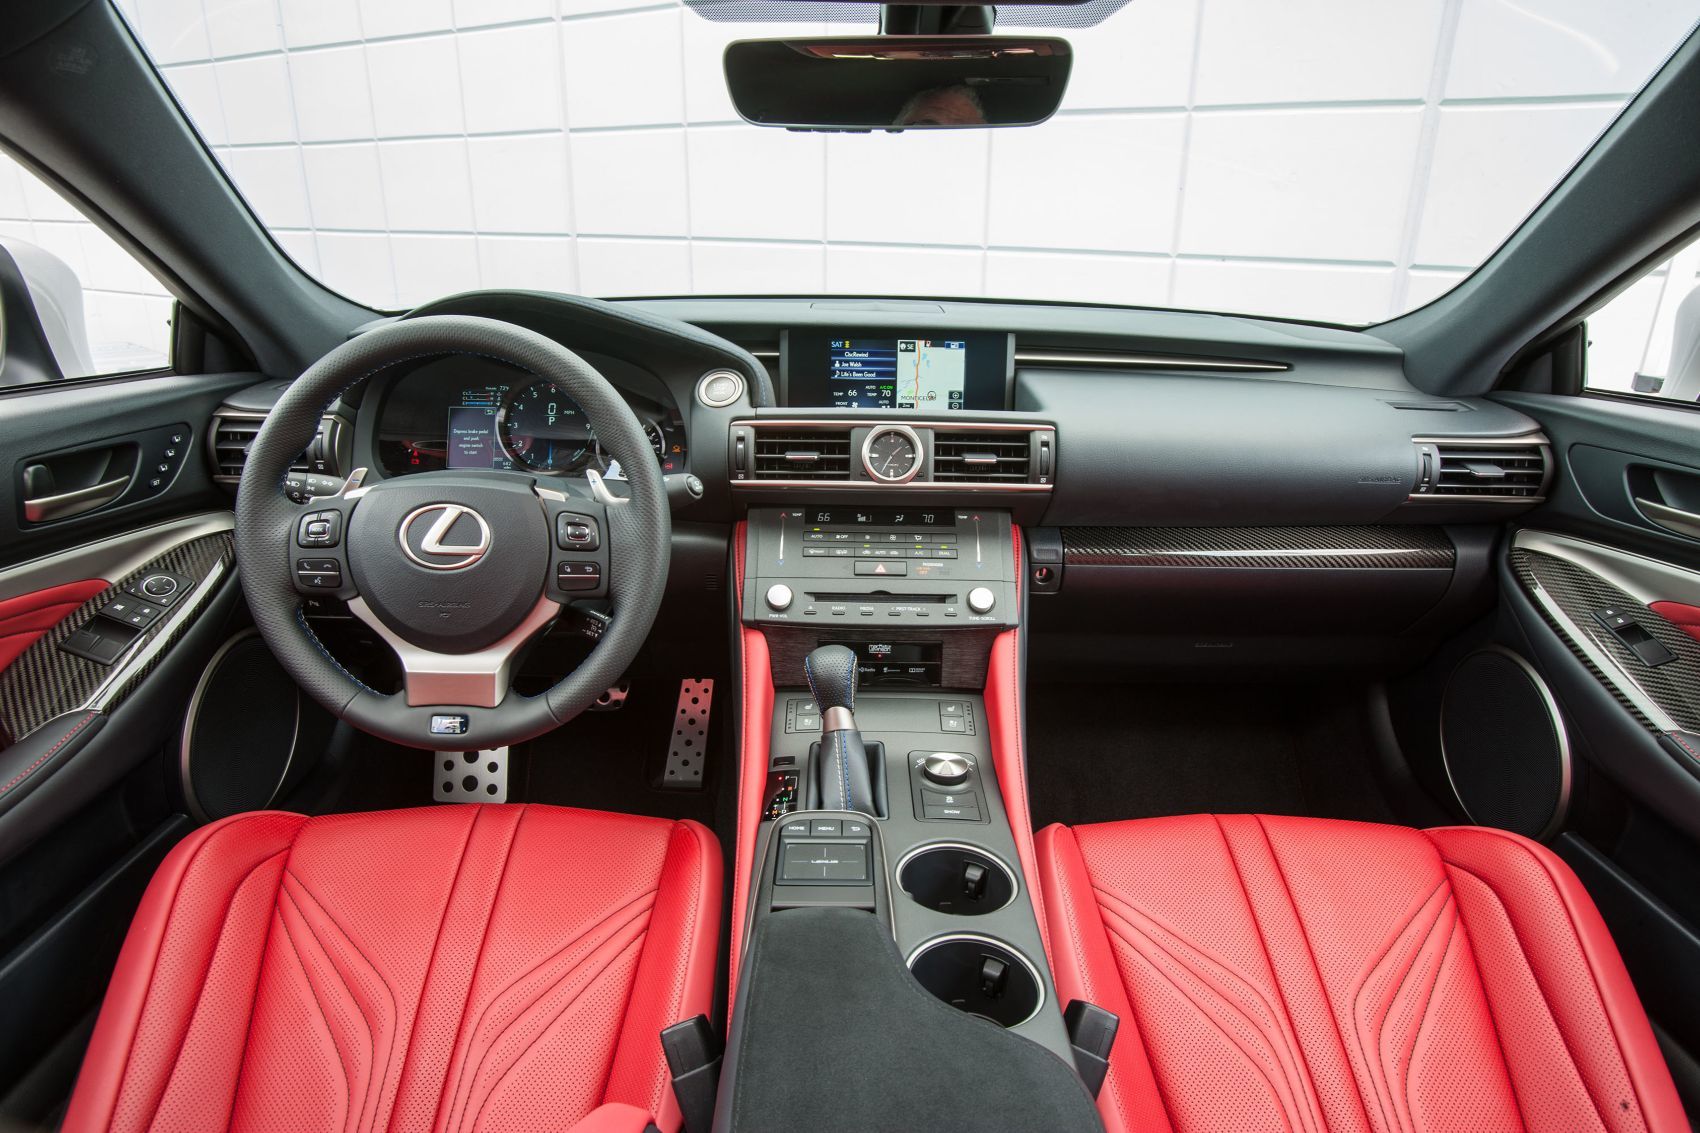 2019 Lexus RC F Review: Come For The Luxury, Stay For The Soundtrack